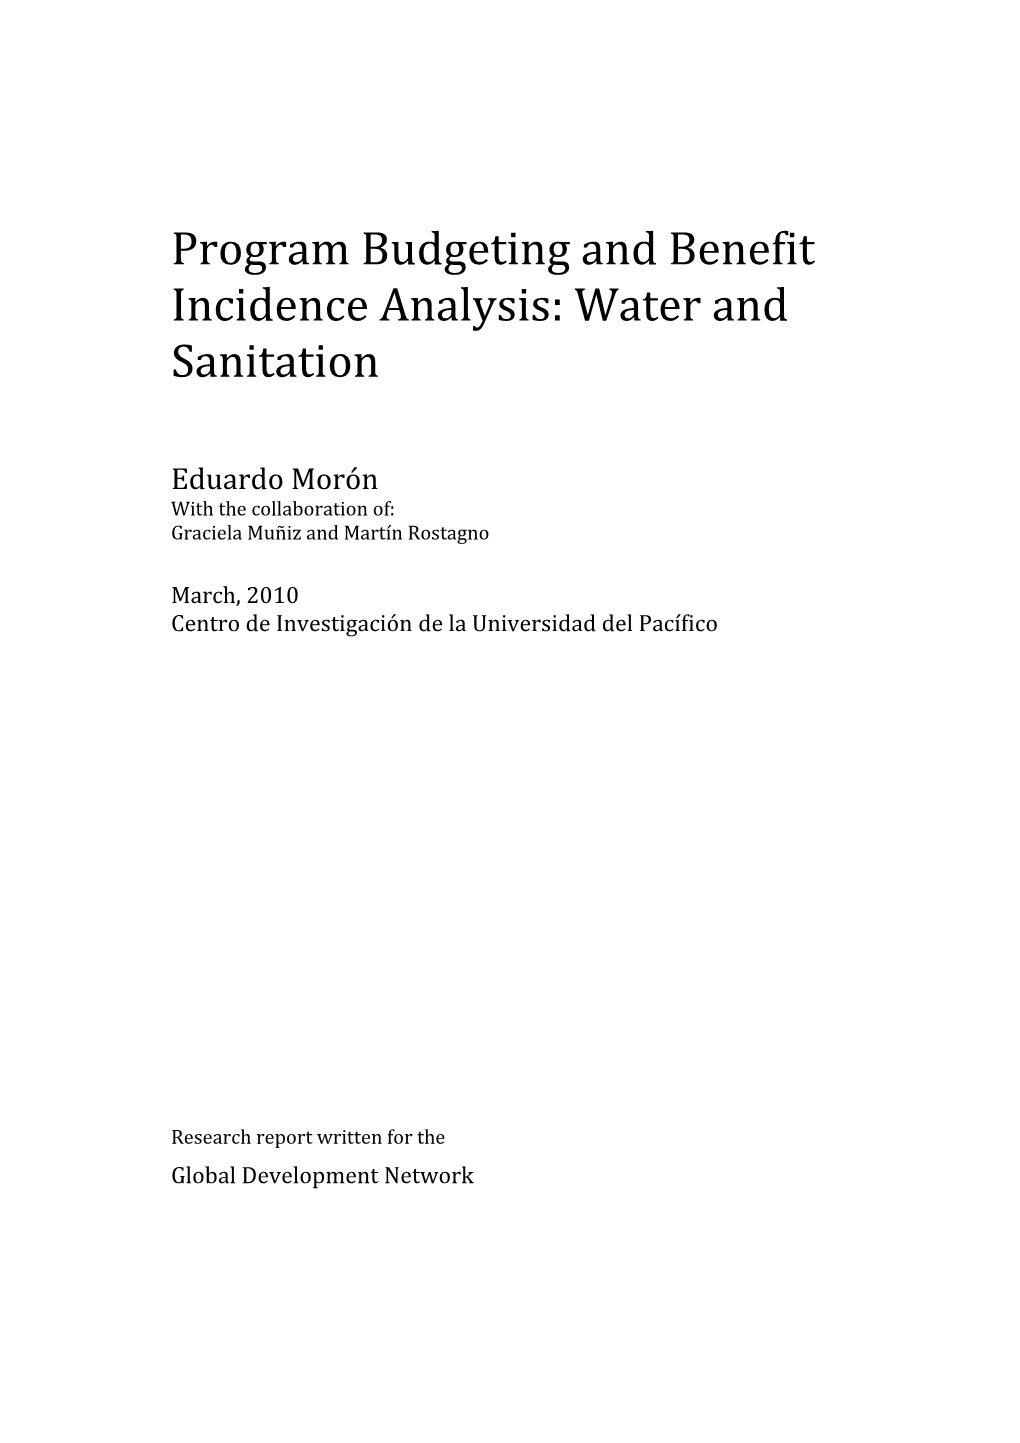 Program Budgeting and Benefit Incidence Analysis: Water and Sanitation Sector